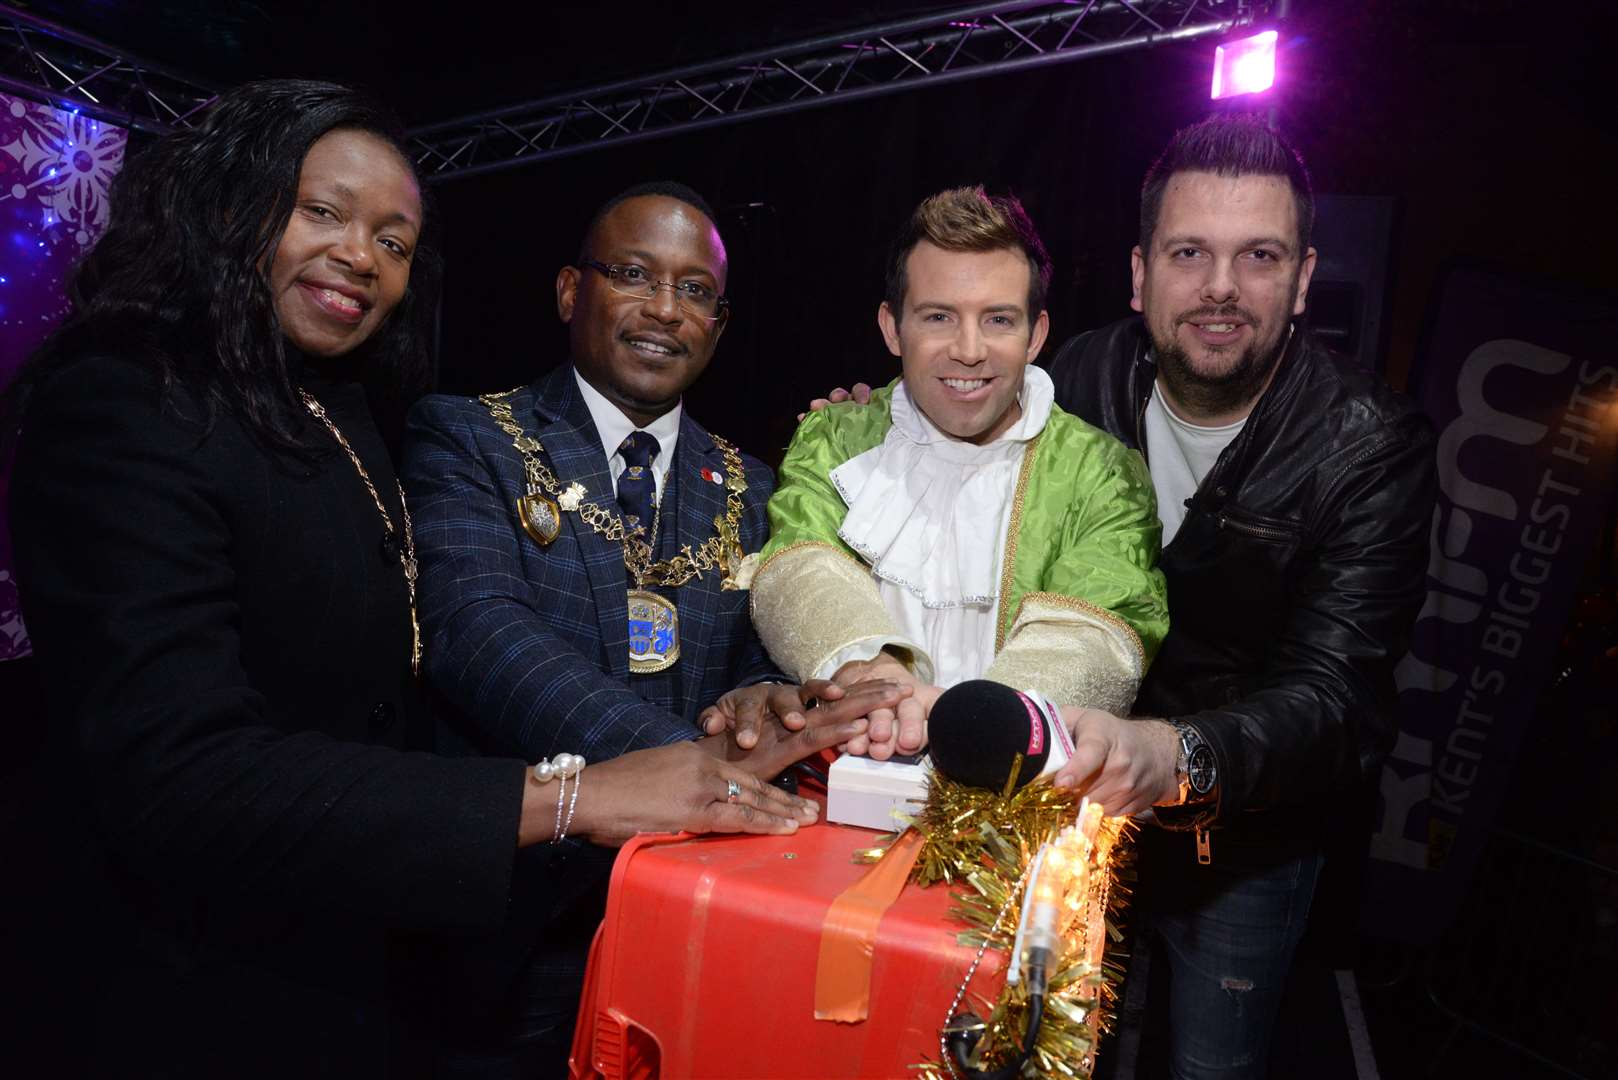 Mayoress Bridget Tejan, Mayor of Medway Cllr Habib Tejan panto star Derek Moran and KMFM's Rob Wills at the Rochester Christmas Lights switch-on during Saturday evening. Picture: Chris Davey. (21787599)